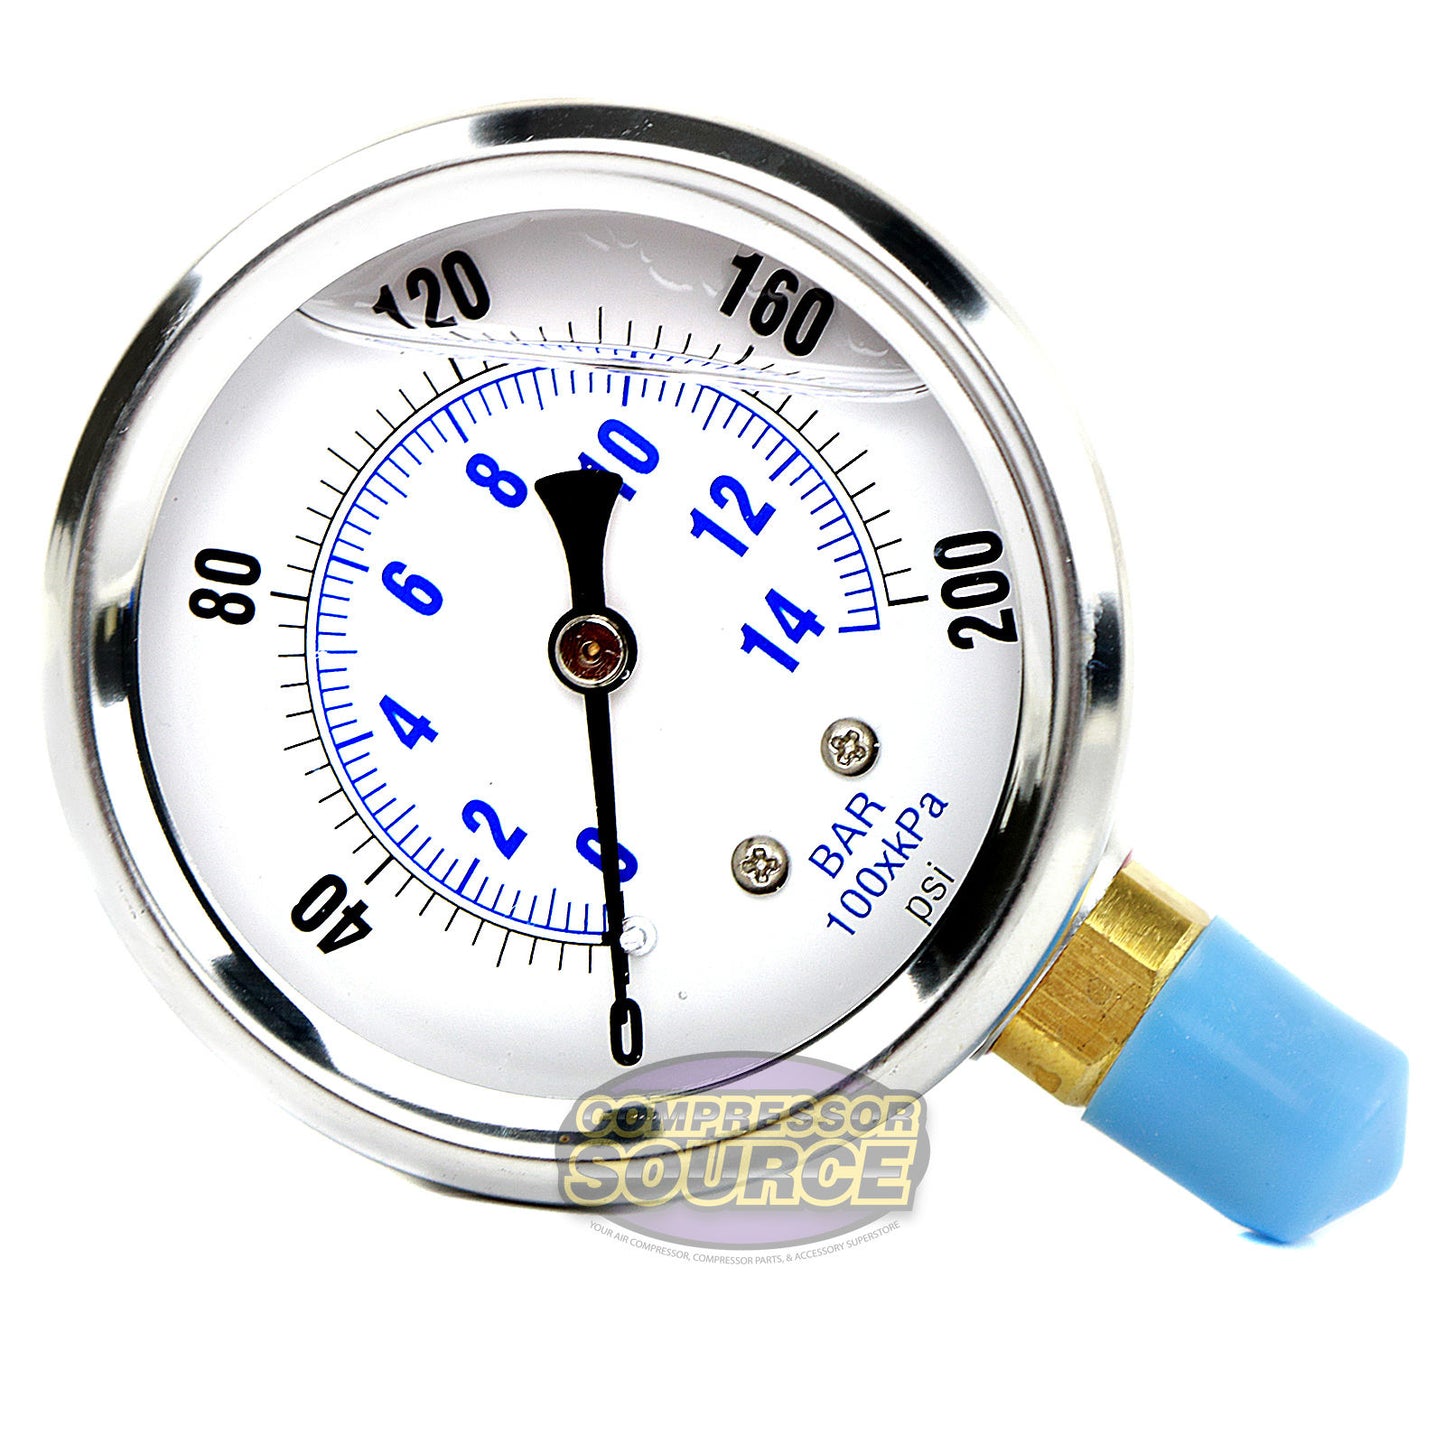 Liquid Filled 0-200 PSI Lower Side Mount Air Pressure Gauge With 2.5" Face